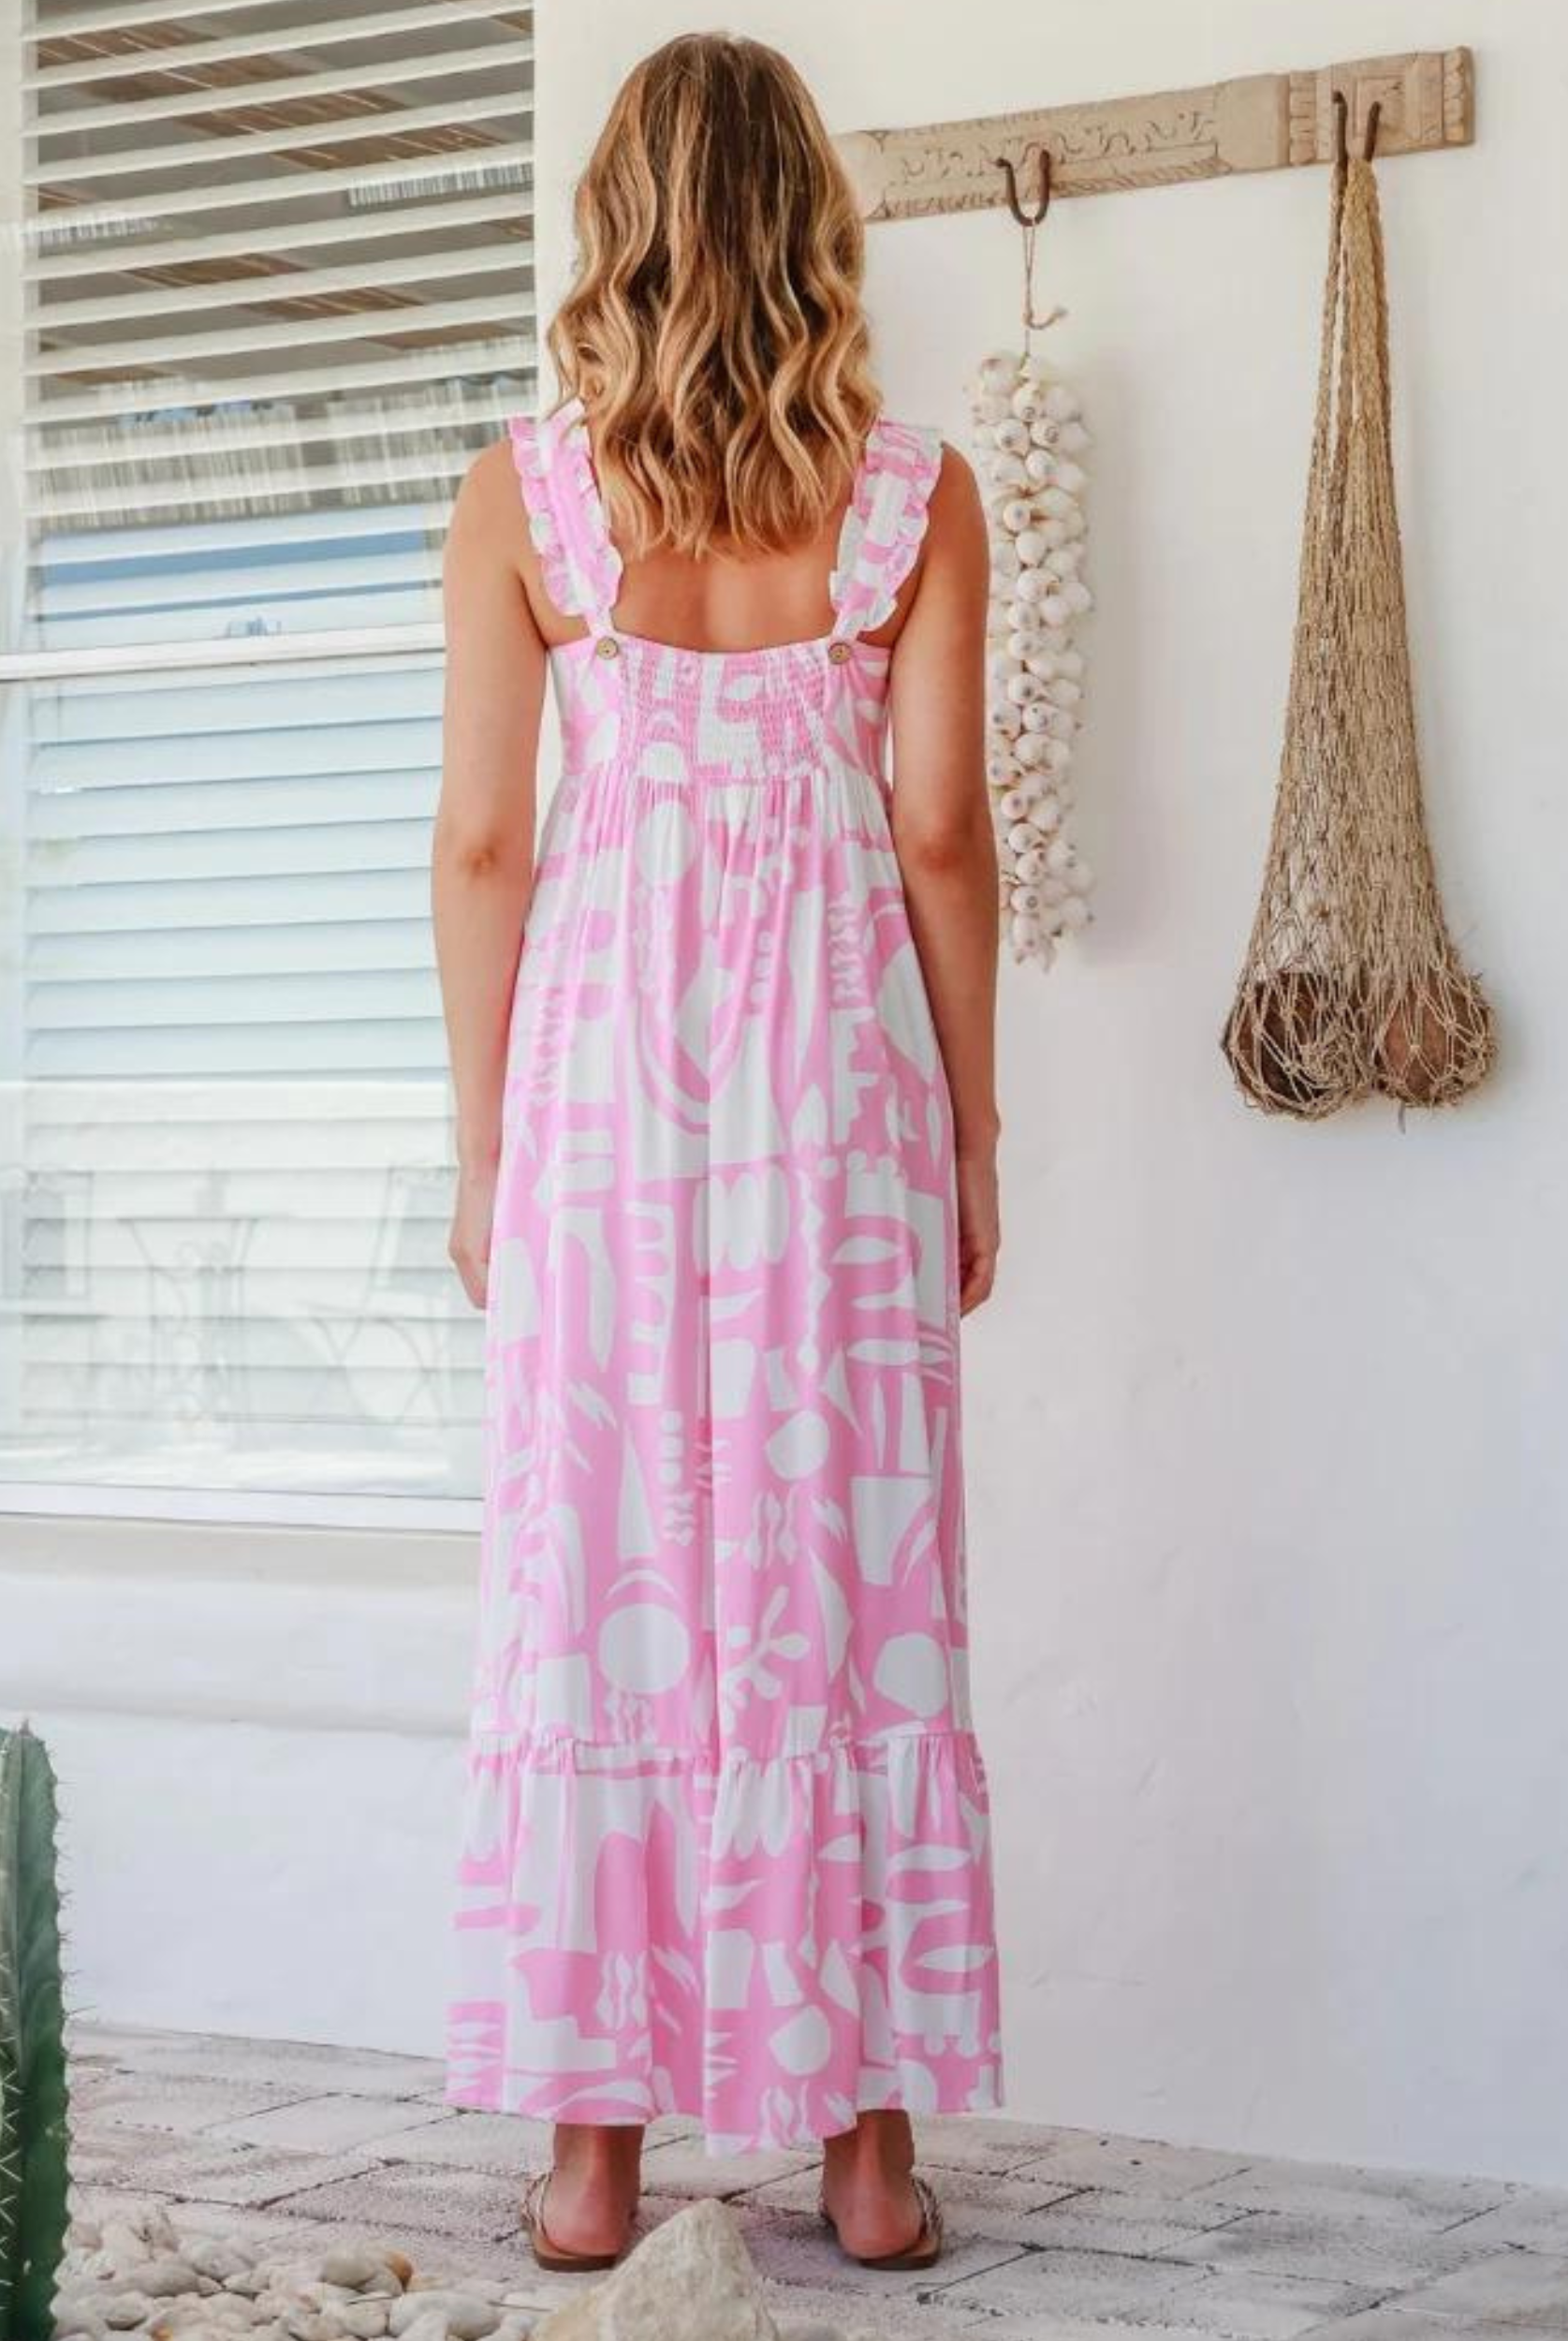 Pink and white geometric printed maxi dress from Label of Love